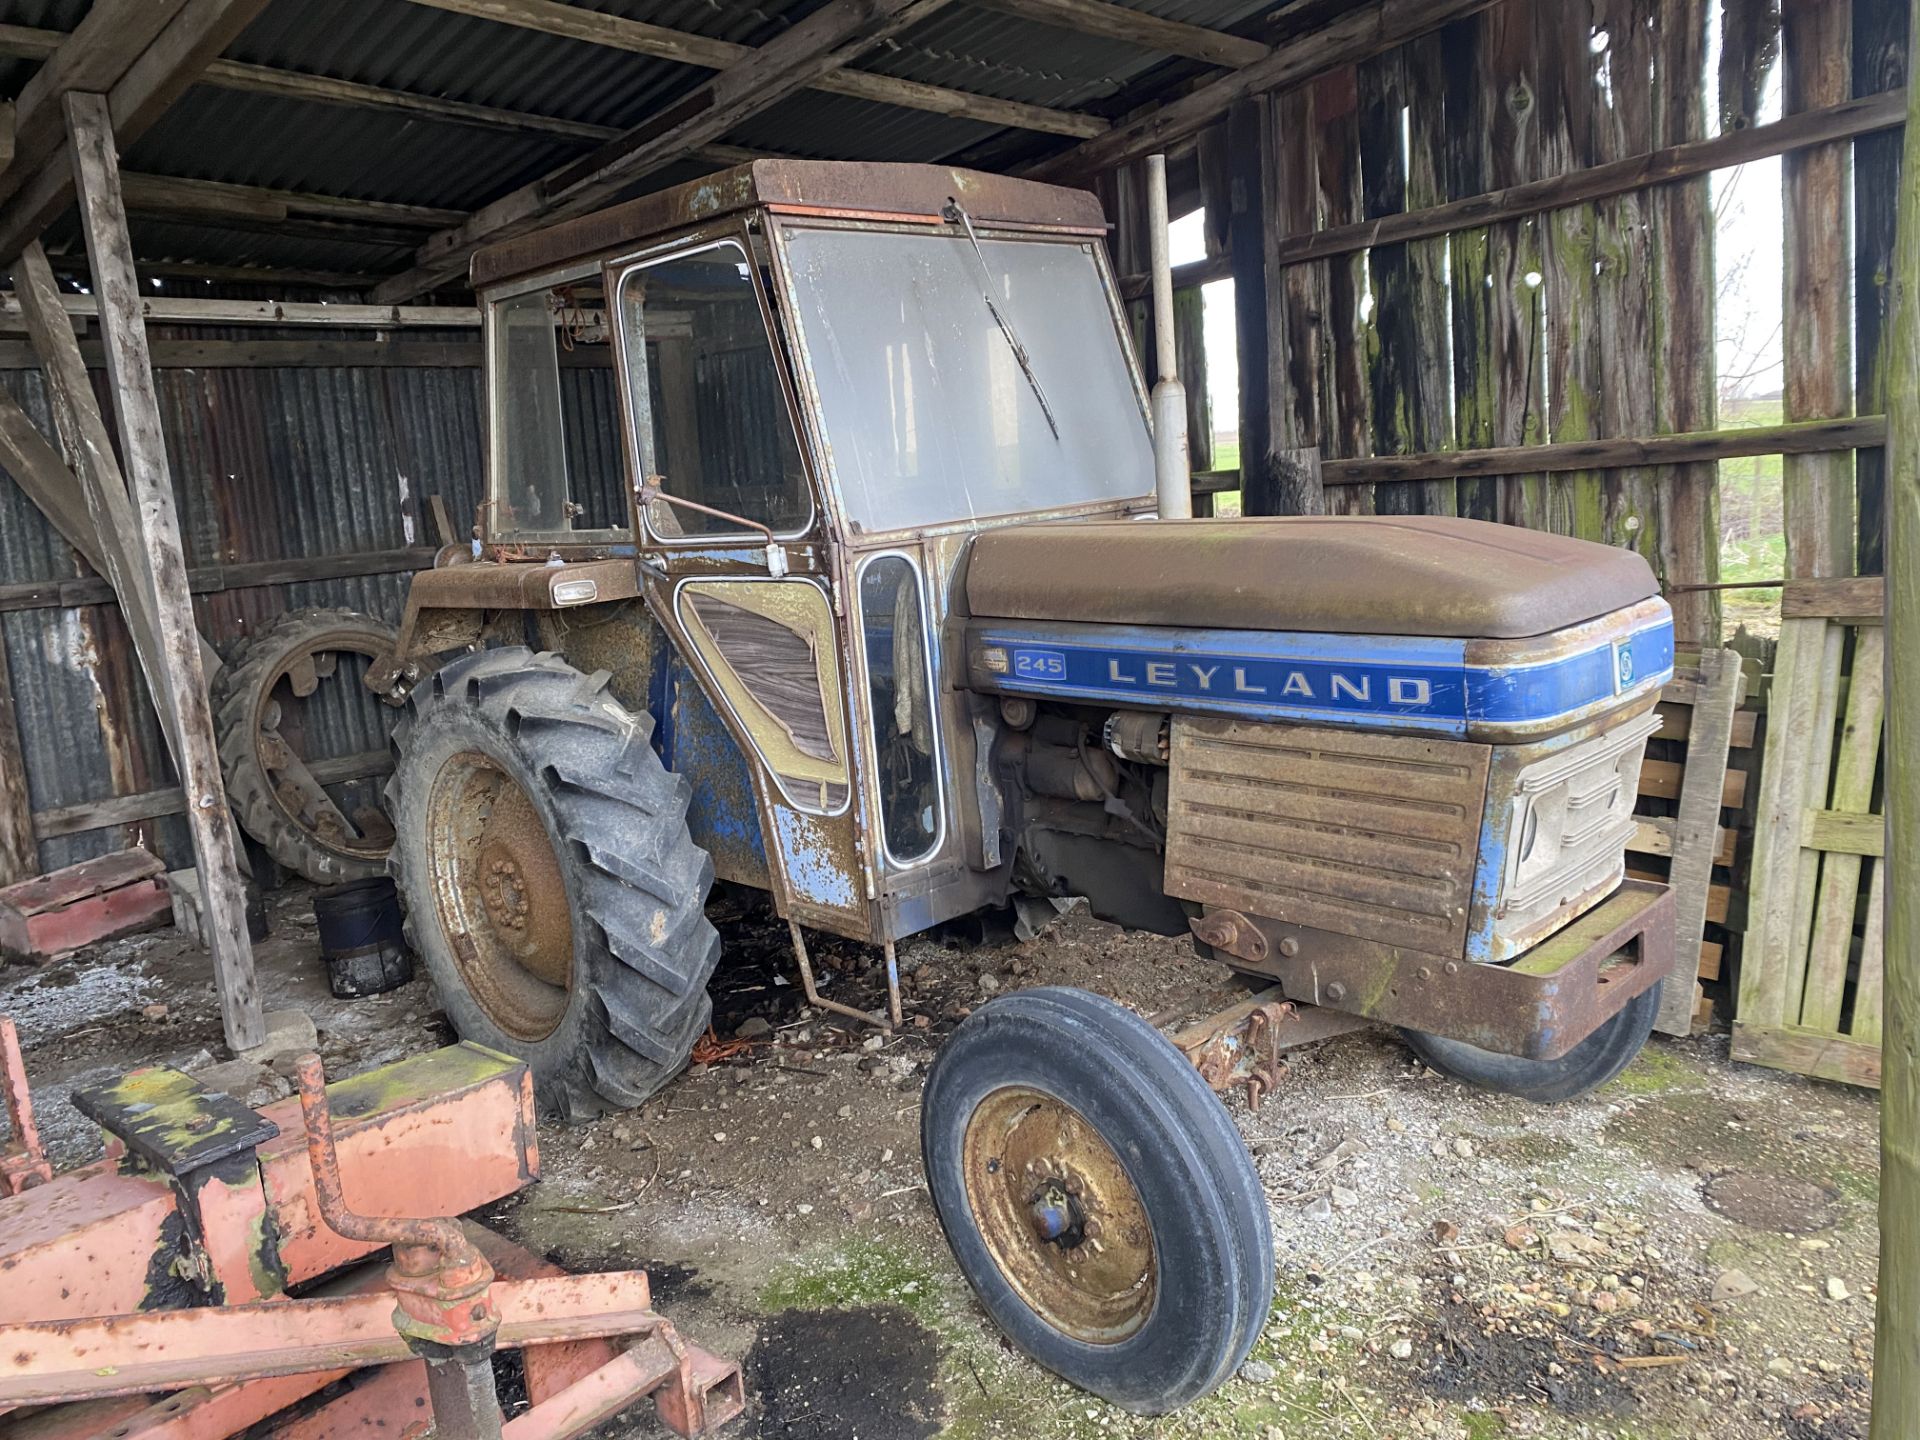 (75) Leyland 245 2wd tractor, 8,500 hrs, Reg KCT 534P, one owner from new, manual in office - Bild 2 aus 4